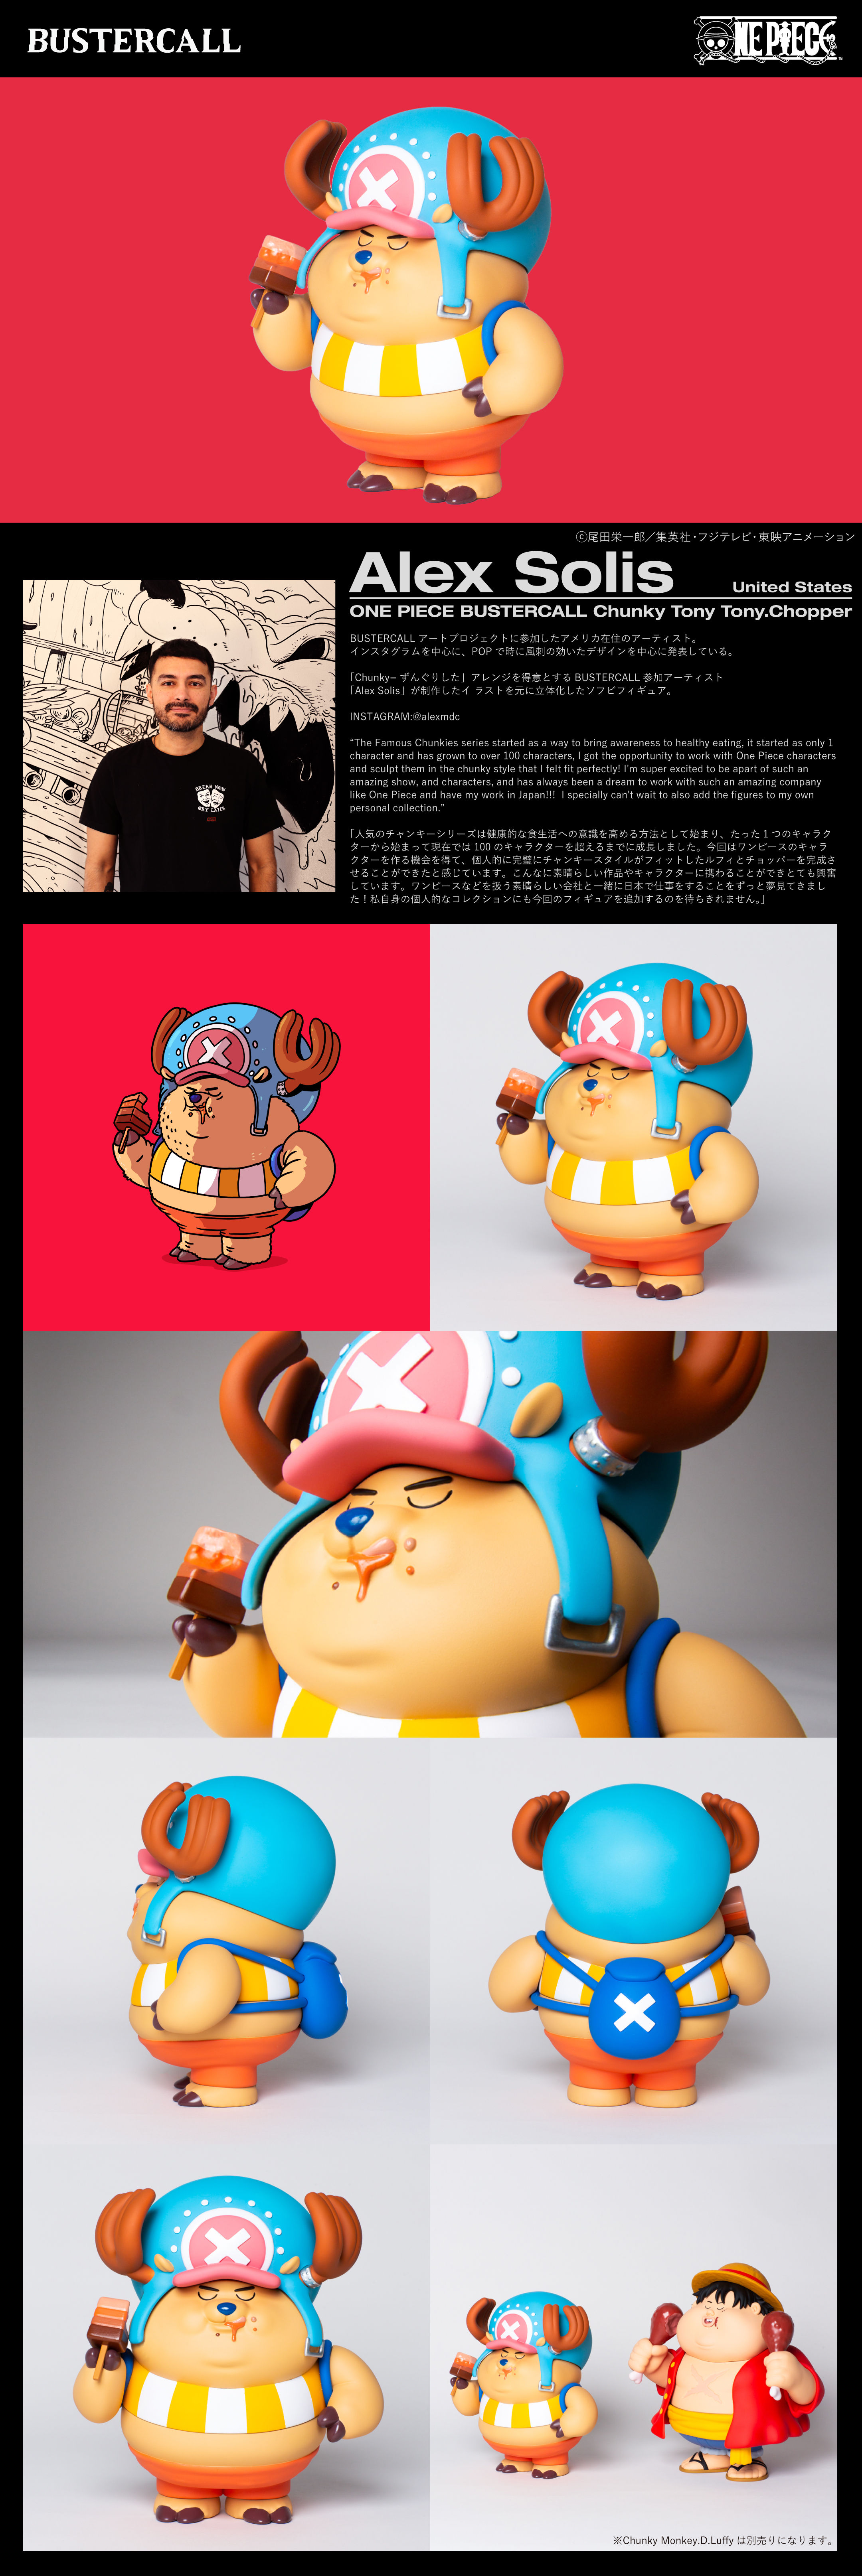 One Piece Bustercall Chunky Tony Tony Chopper One Piece Bustercall プレミアムバンダイ公式通販